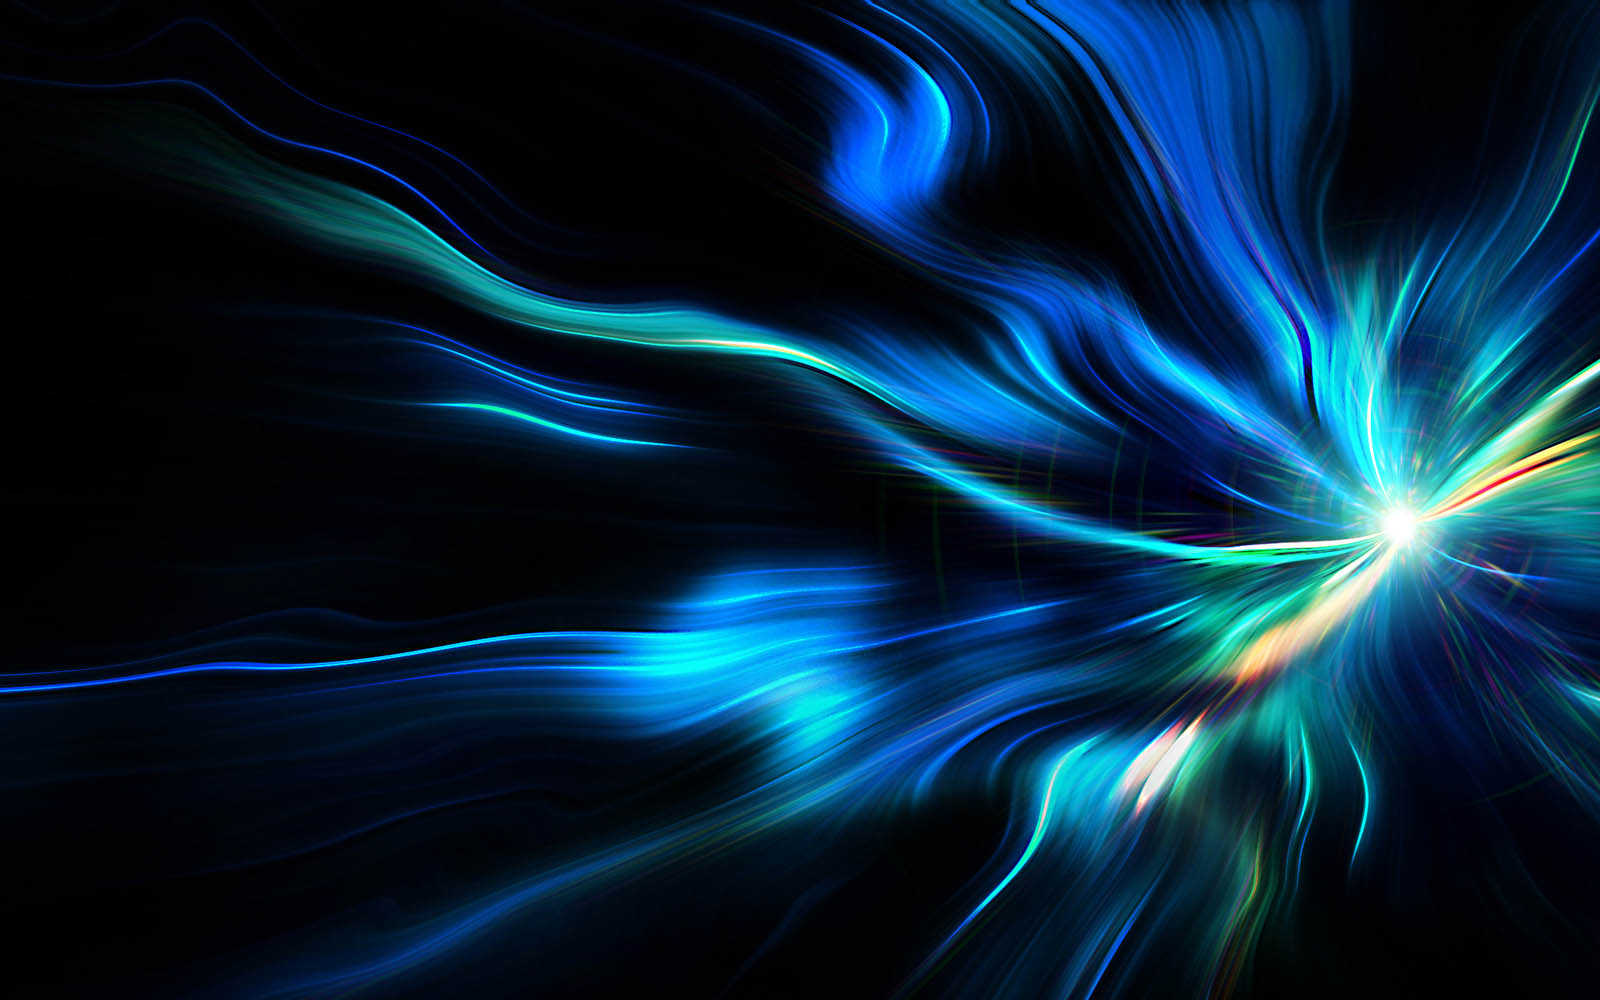 Related wallpapers from 3D Moving Wallpaper For Windows 7